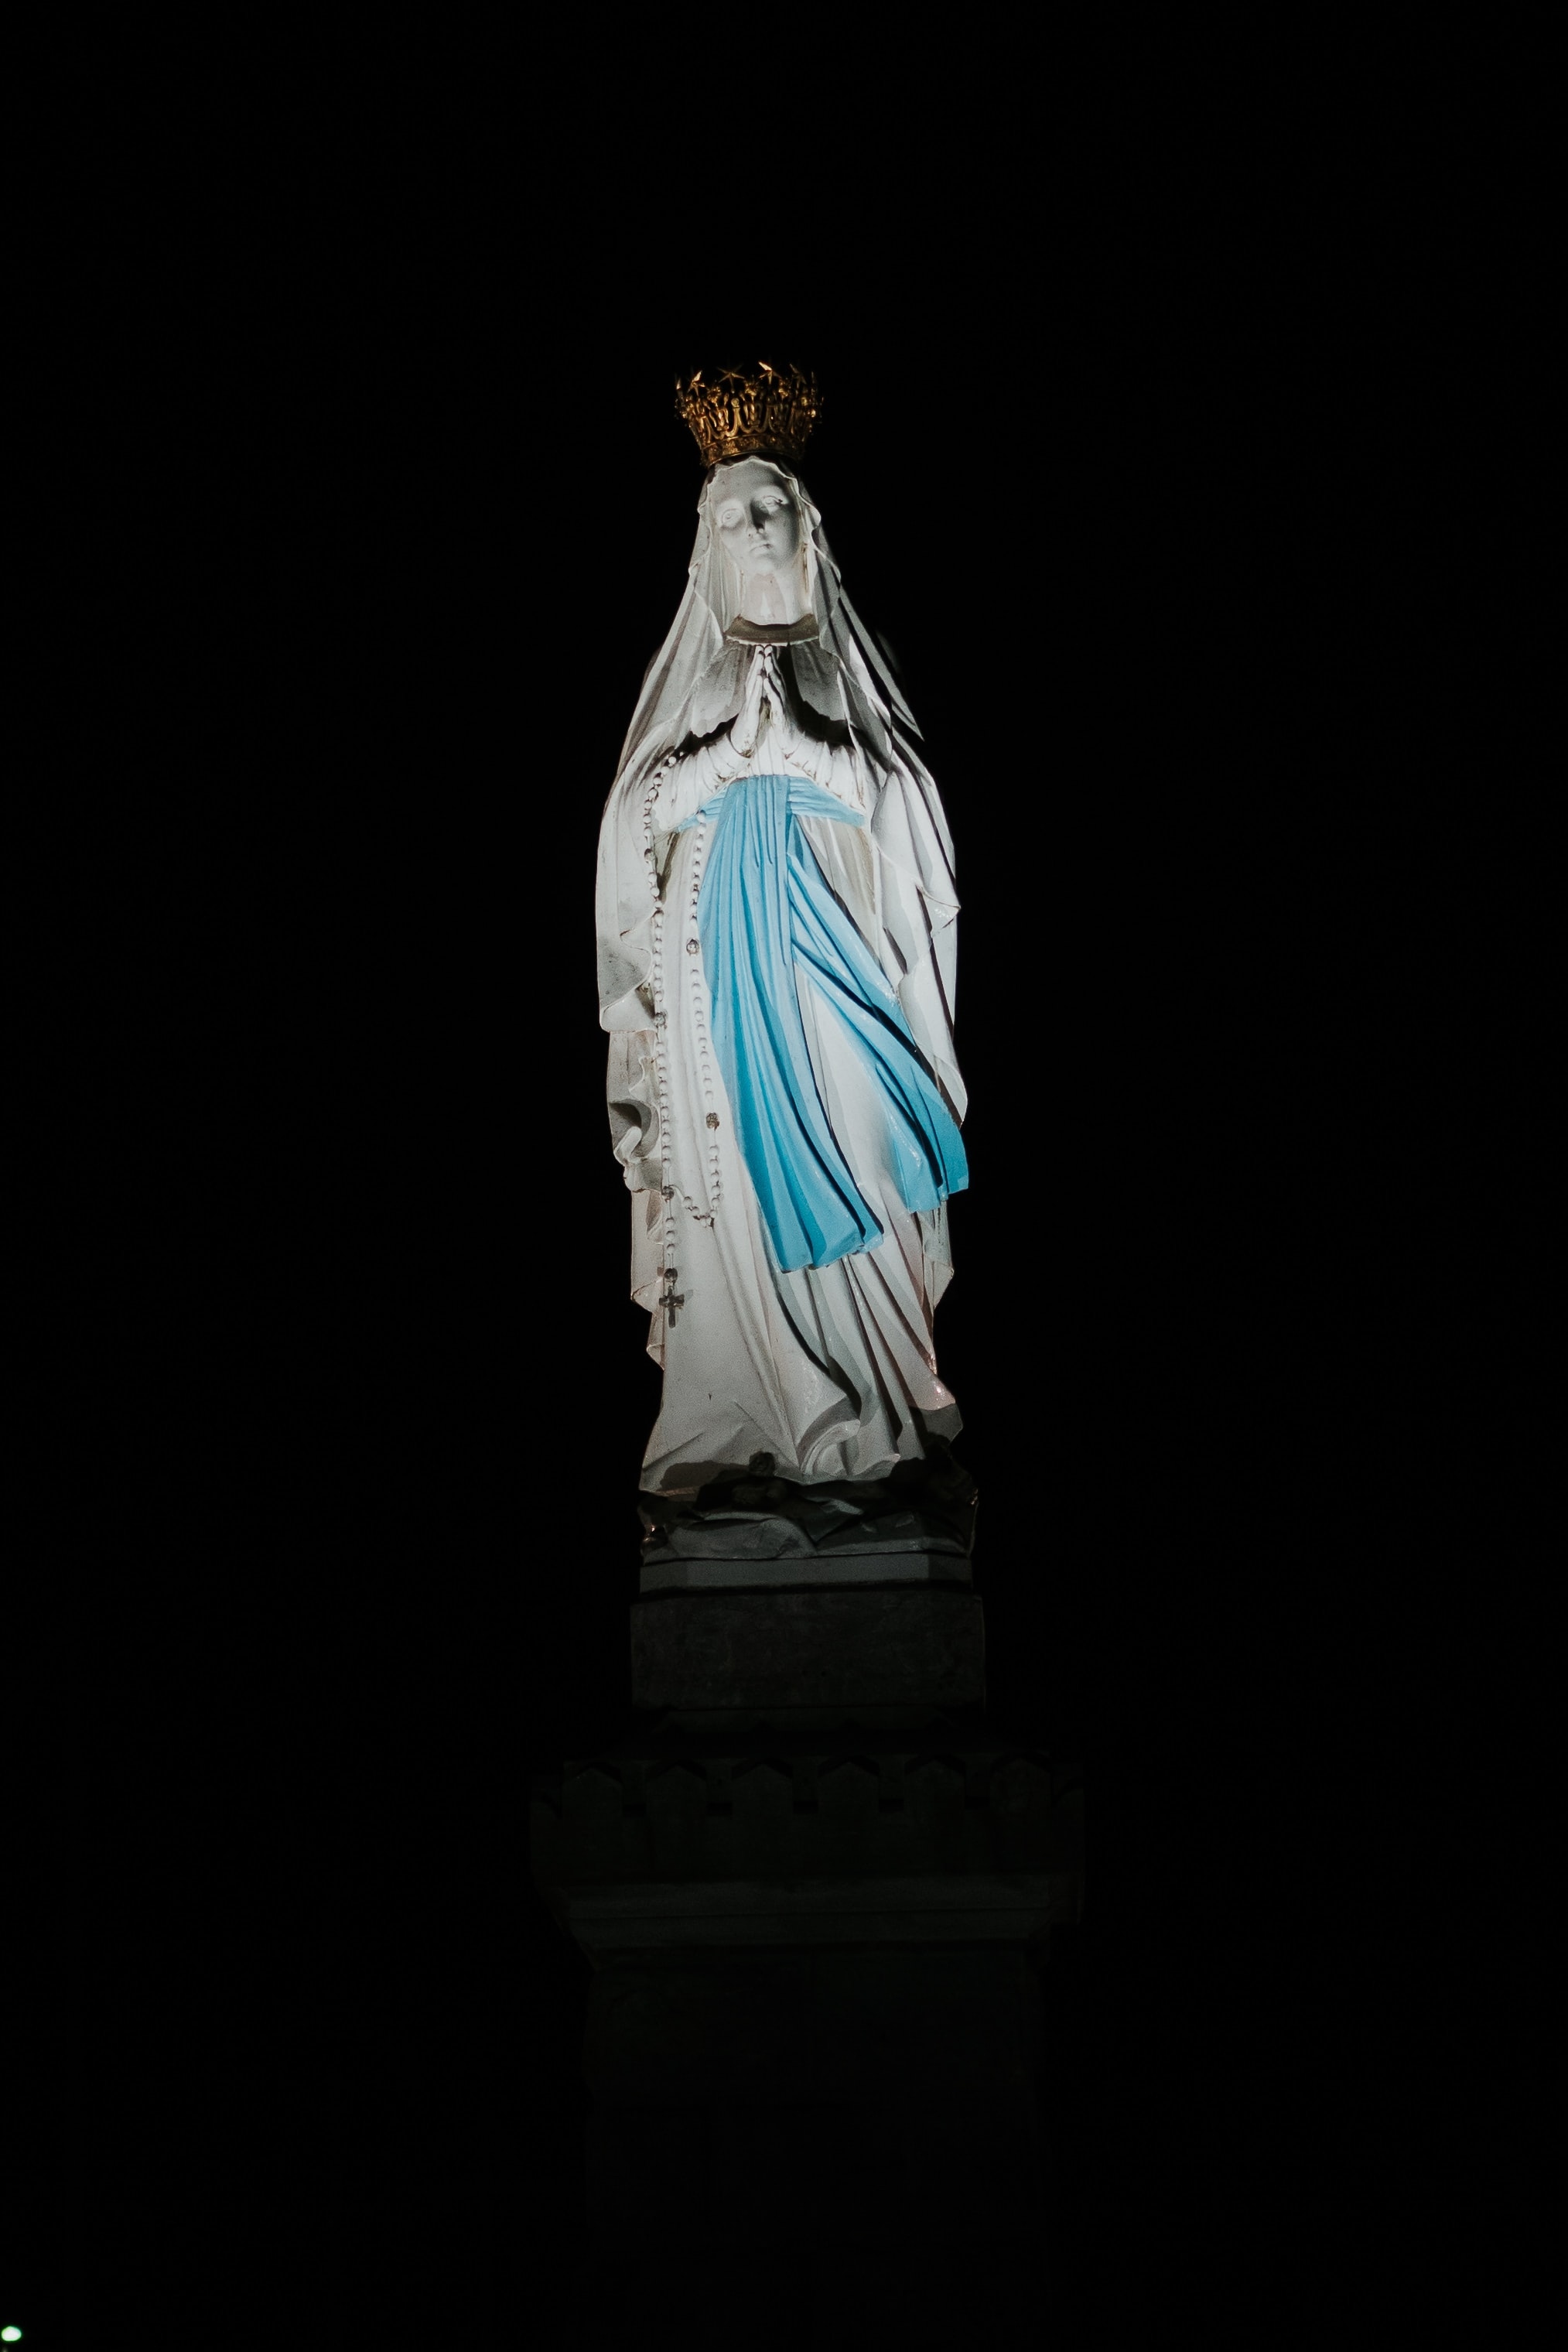 Mother Mary Photos With Black Background